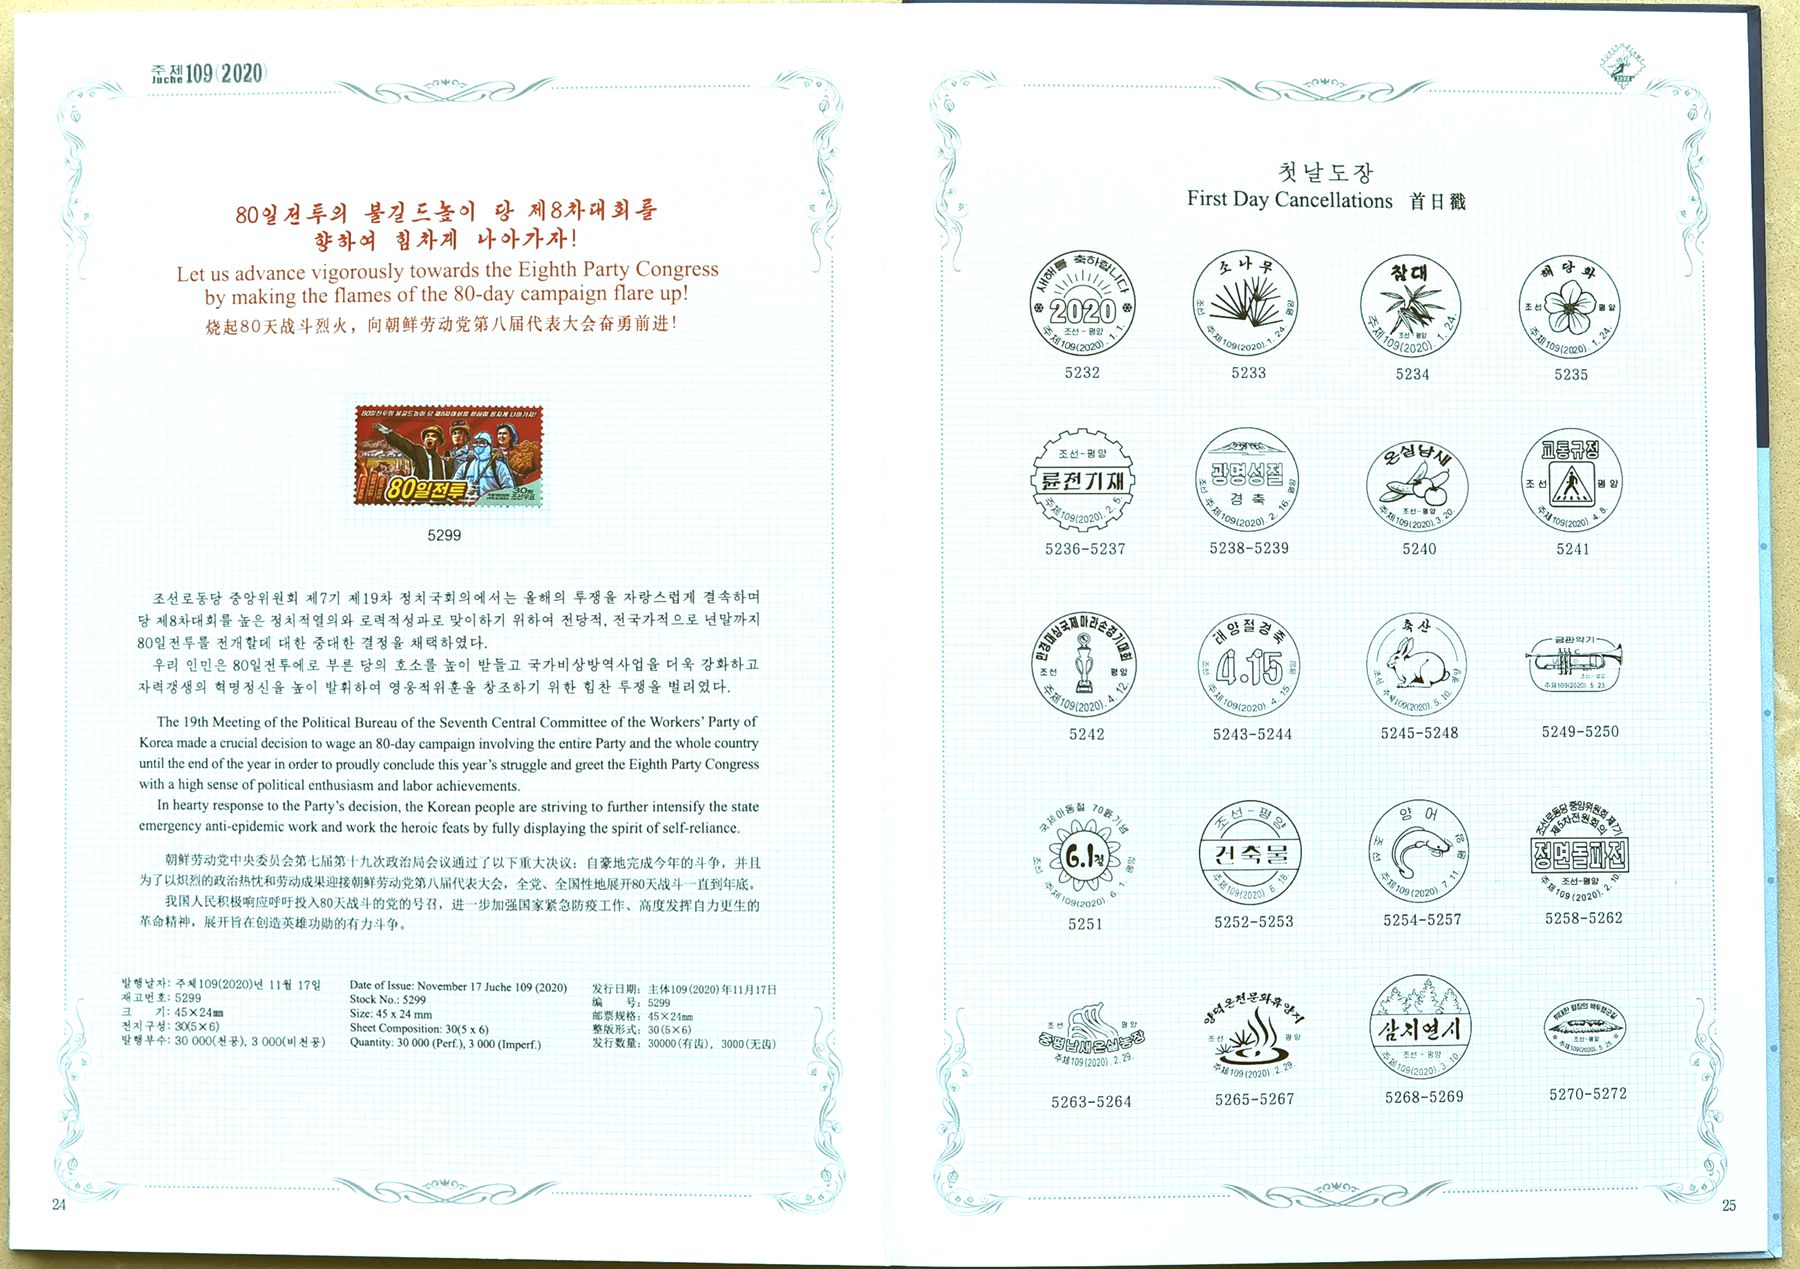 L4076, Korea 2020 Full Set Stamps and SS (MS), MNH with Album